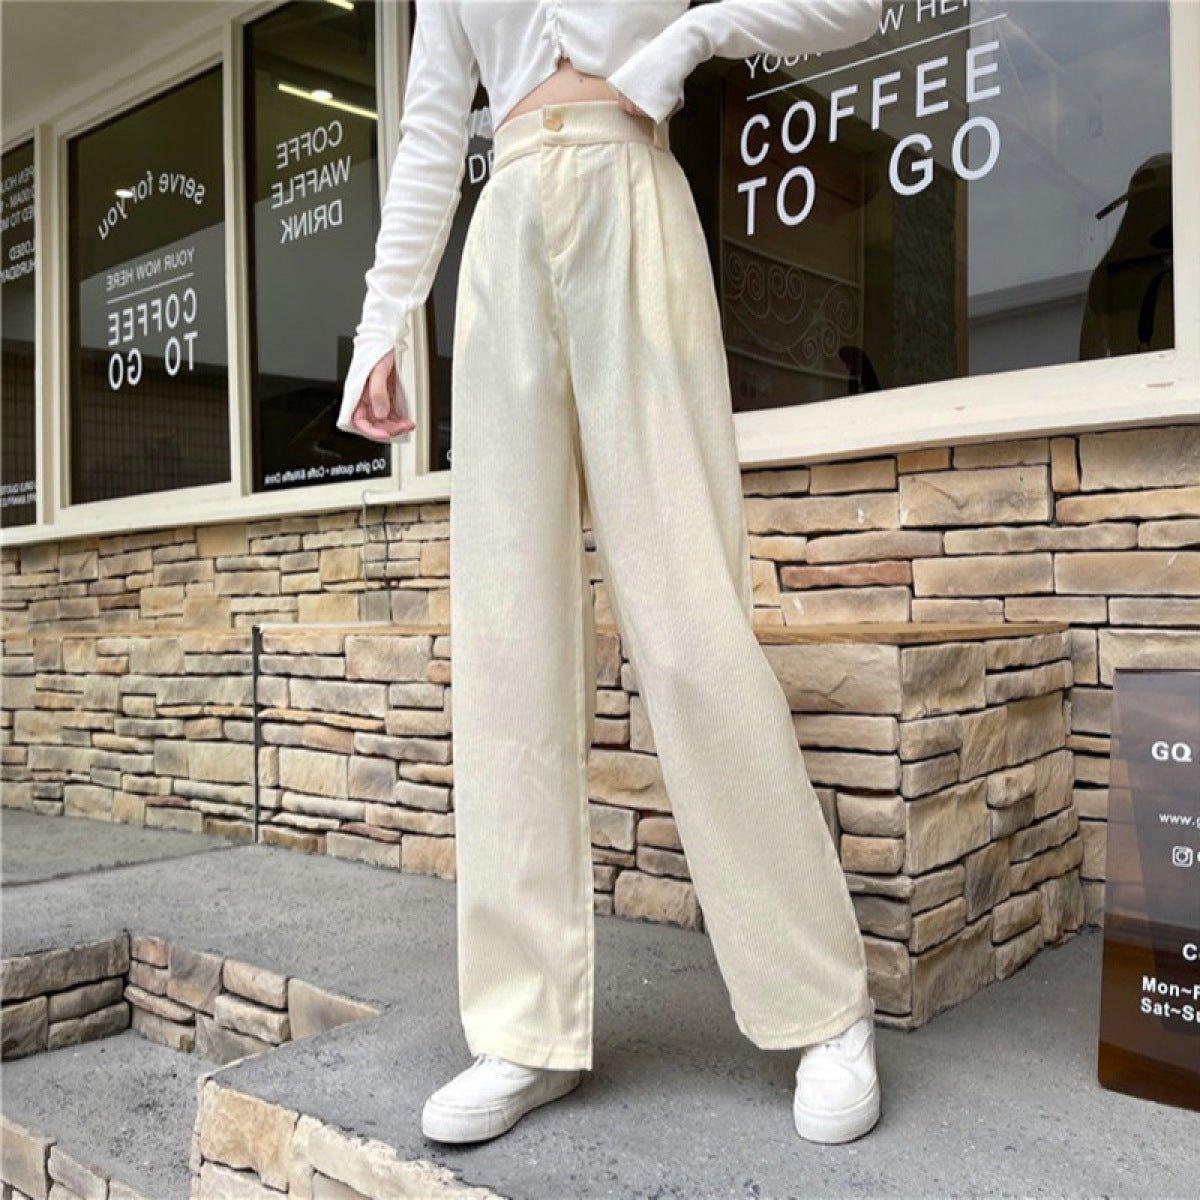 Navy corduroy pants outfit brandy melville navy blue high rise john  galt  Outfits With Corduroy Pants  Brandy Melville Corduroy Pant Outfits  High Rise